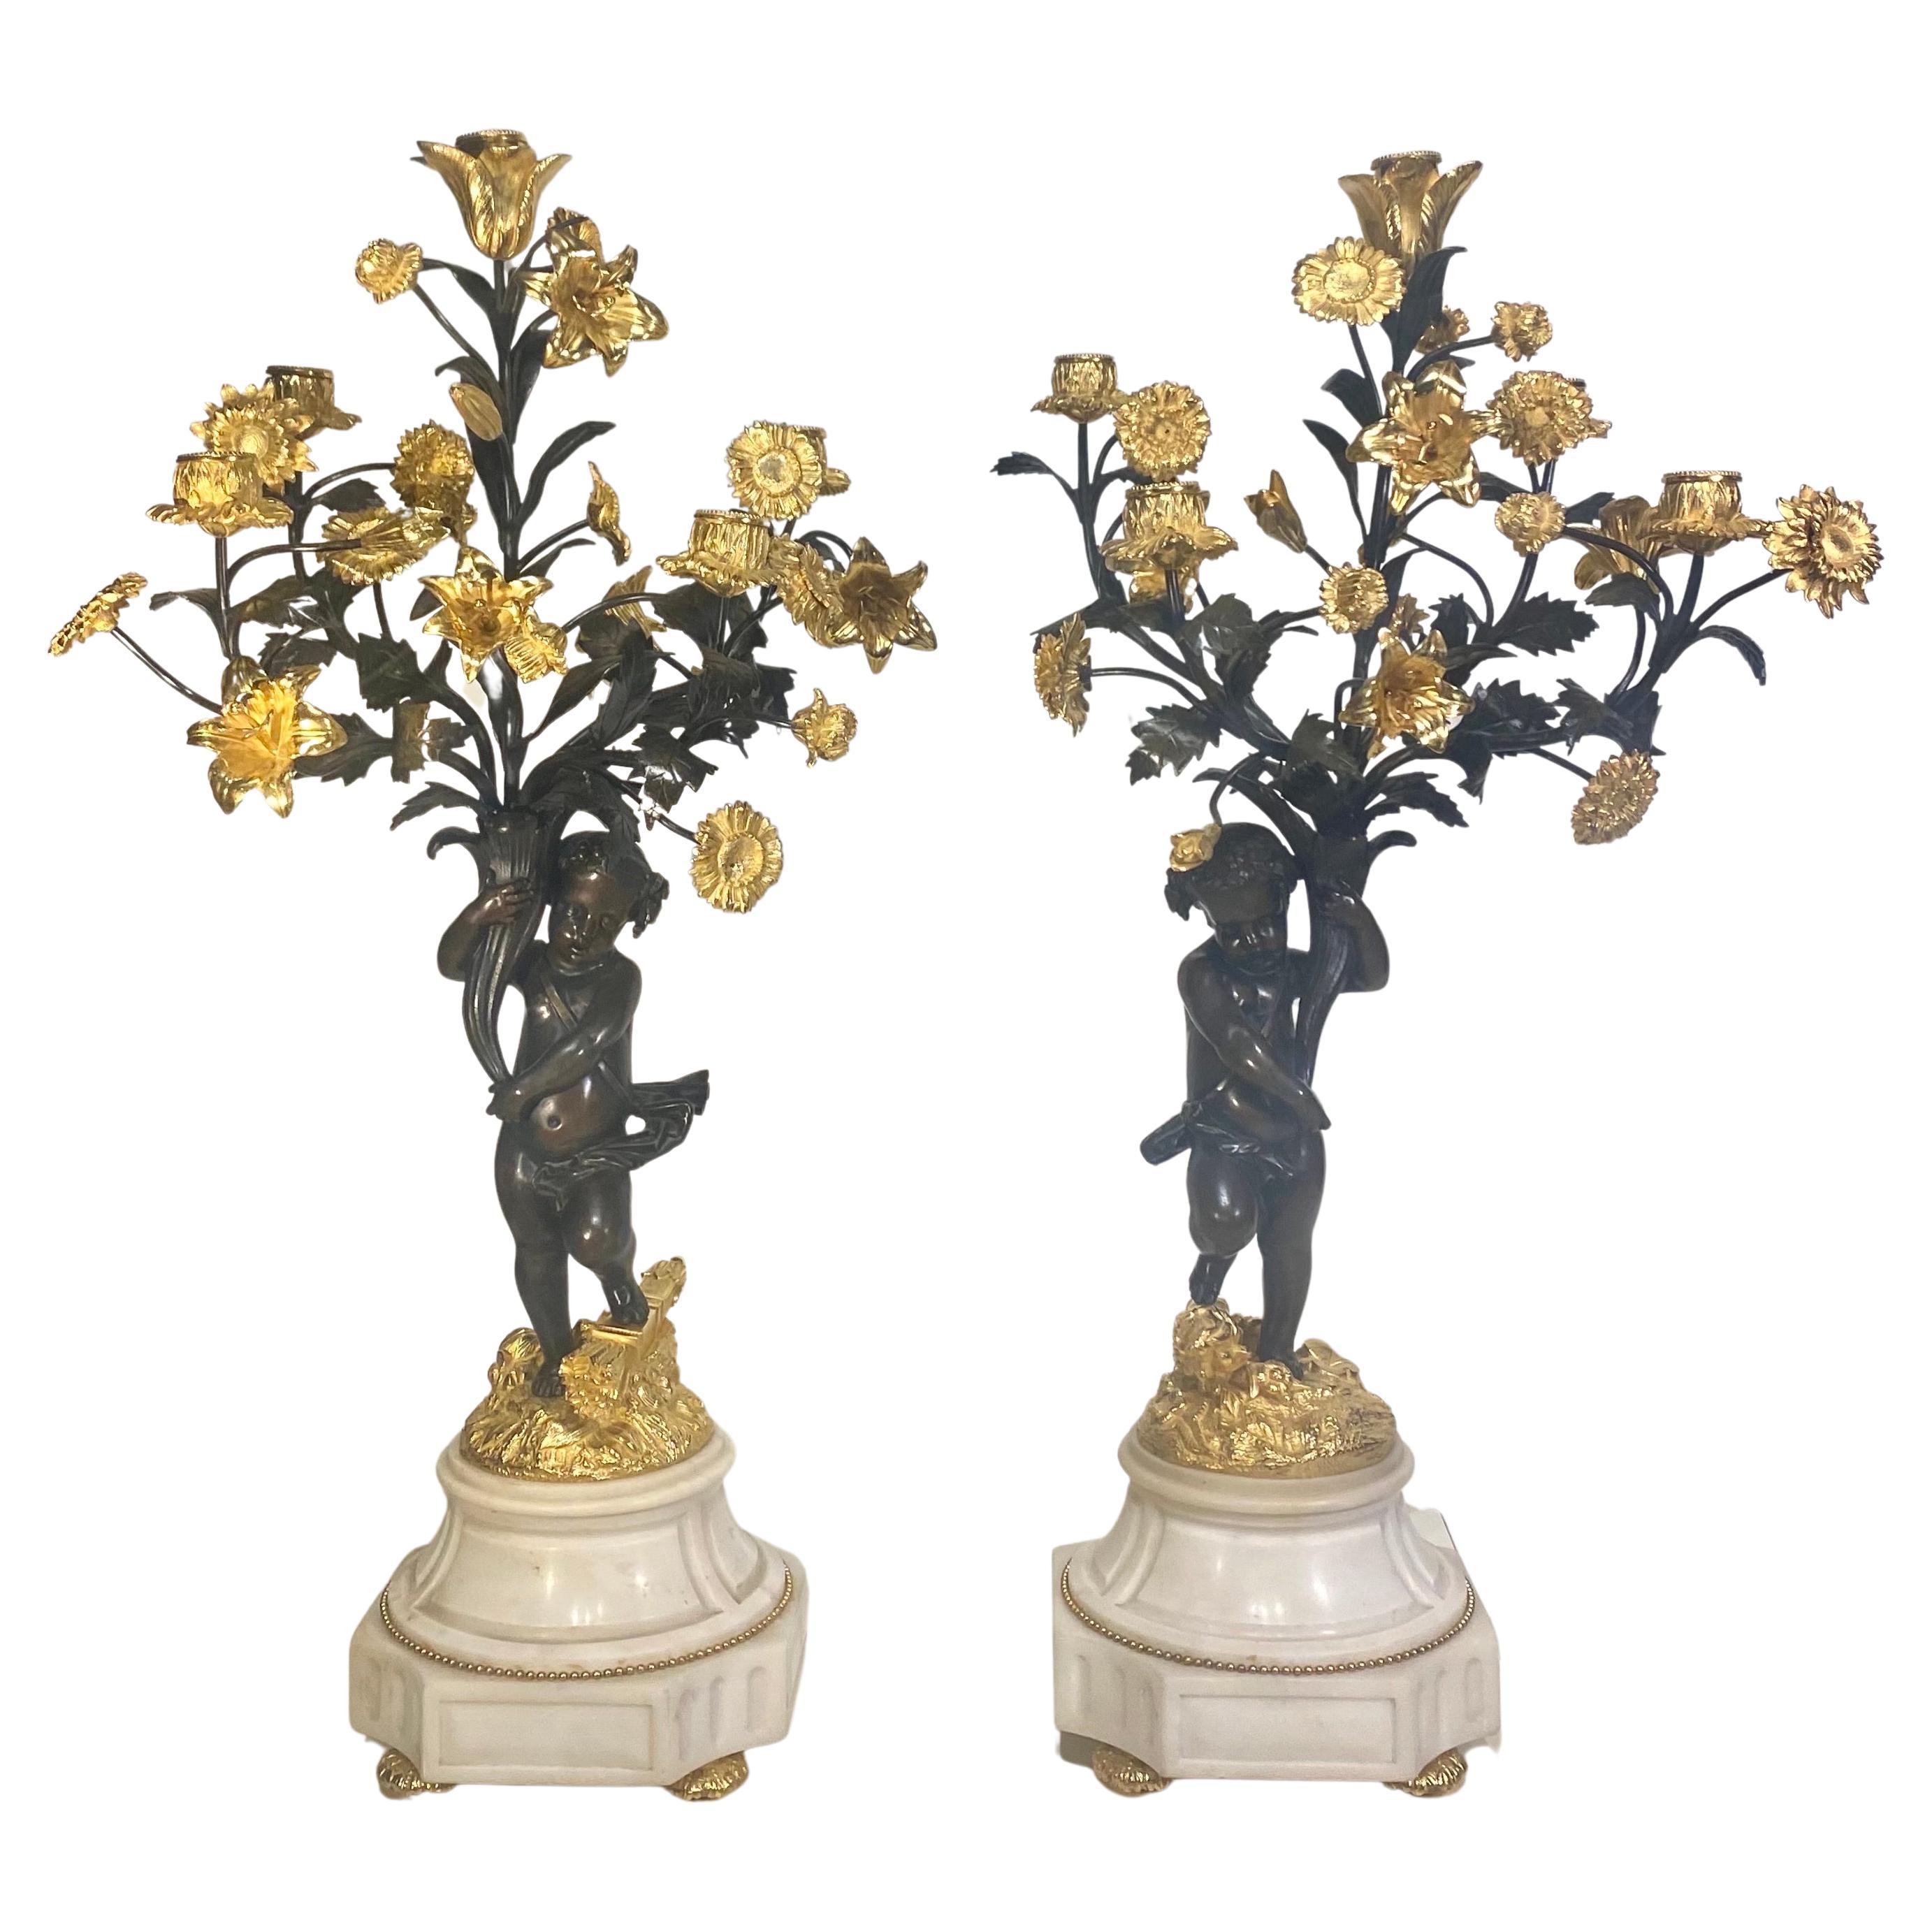 A fine true pair of patinated bronze, ormolu and white marble figural Cherub candelabra in excellent condition. Set upon a white marble base, with ormolu beads surrounding the marble. 
The putti stand upon rocks, holding up the five branch stems,